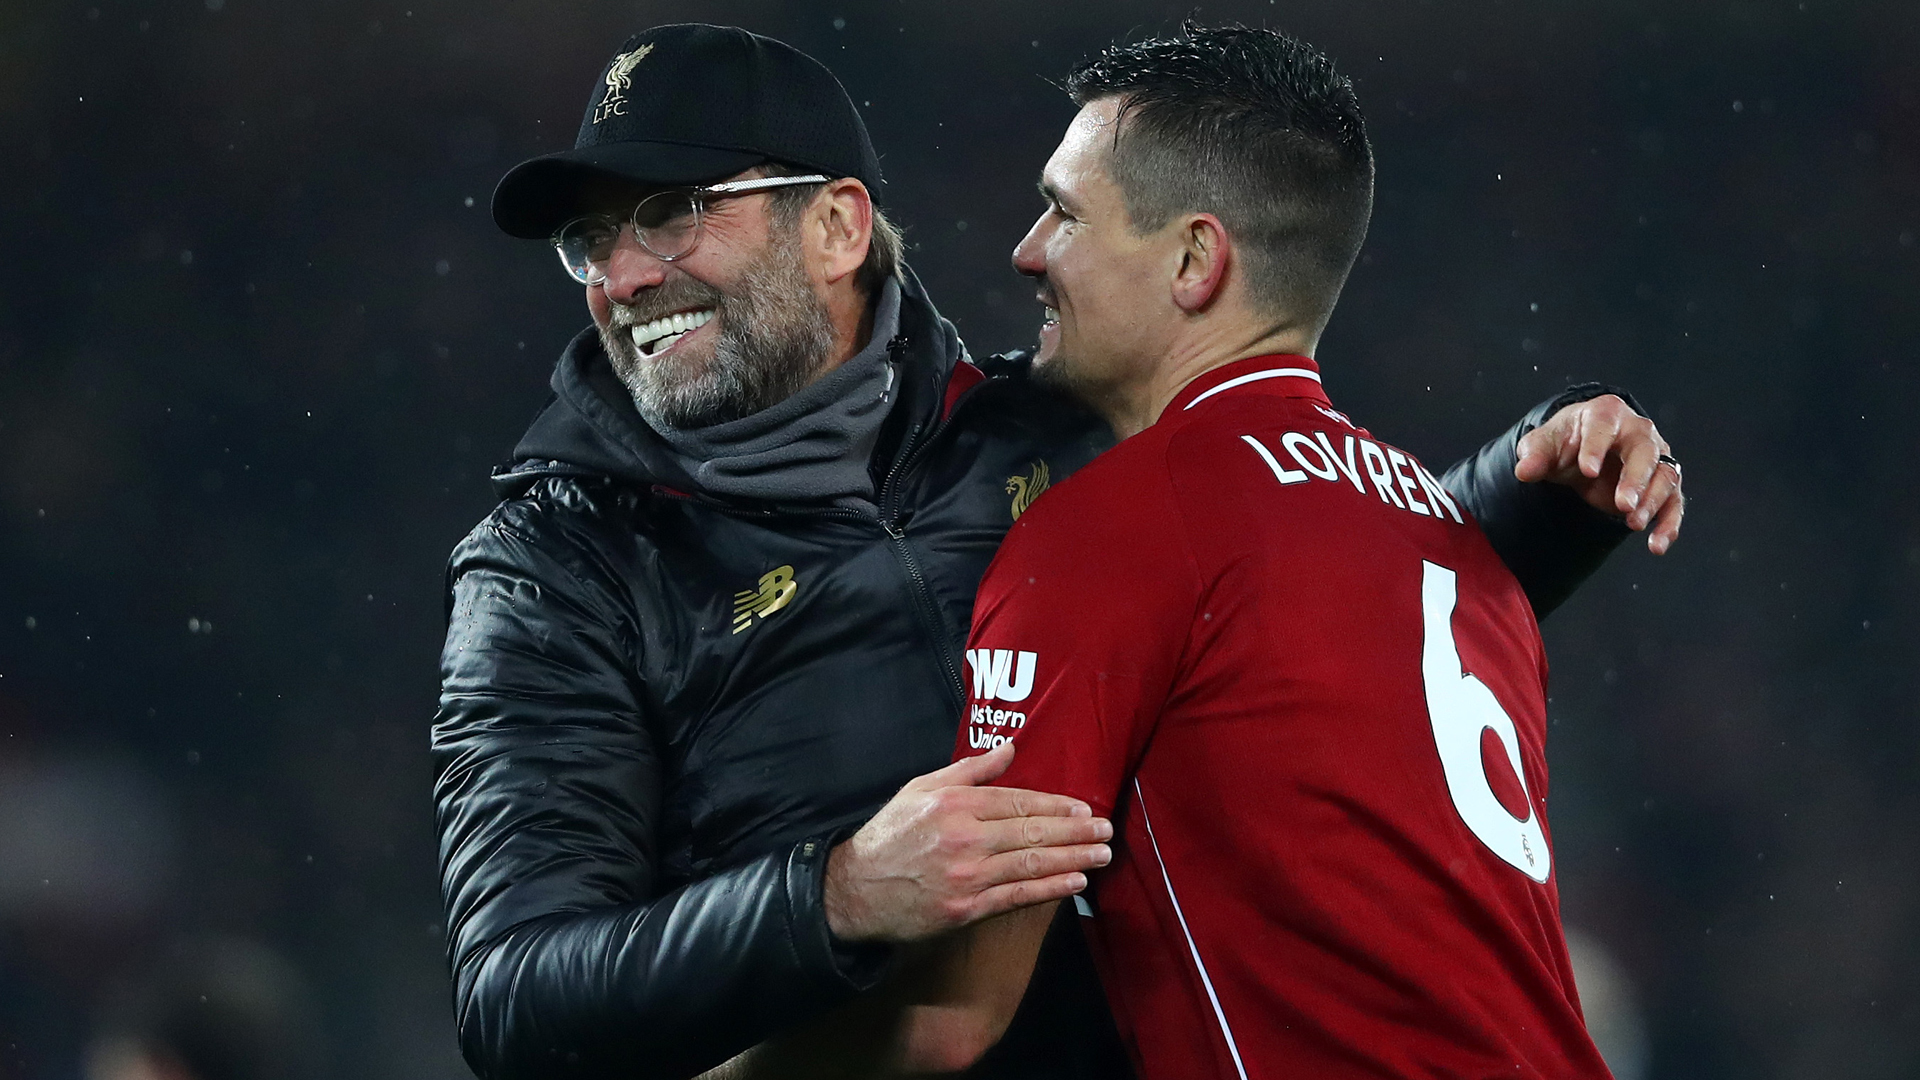 Dejan Lovren believes a settled squad will help Liverpool challenge for honours in the coming years, provided they retain their focus.